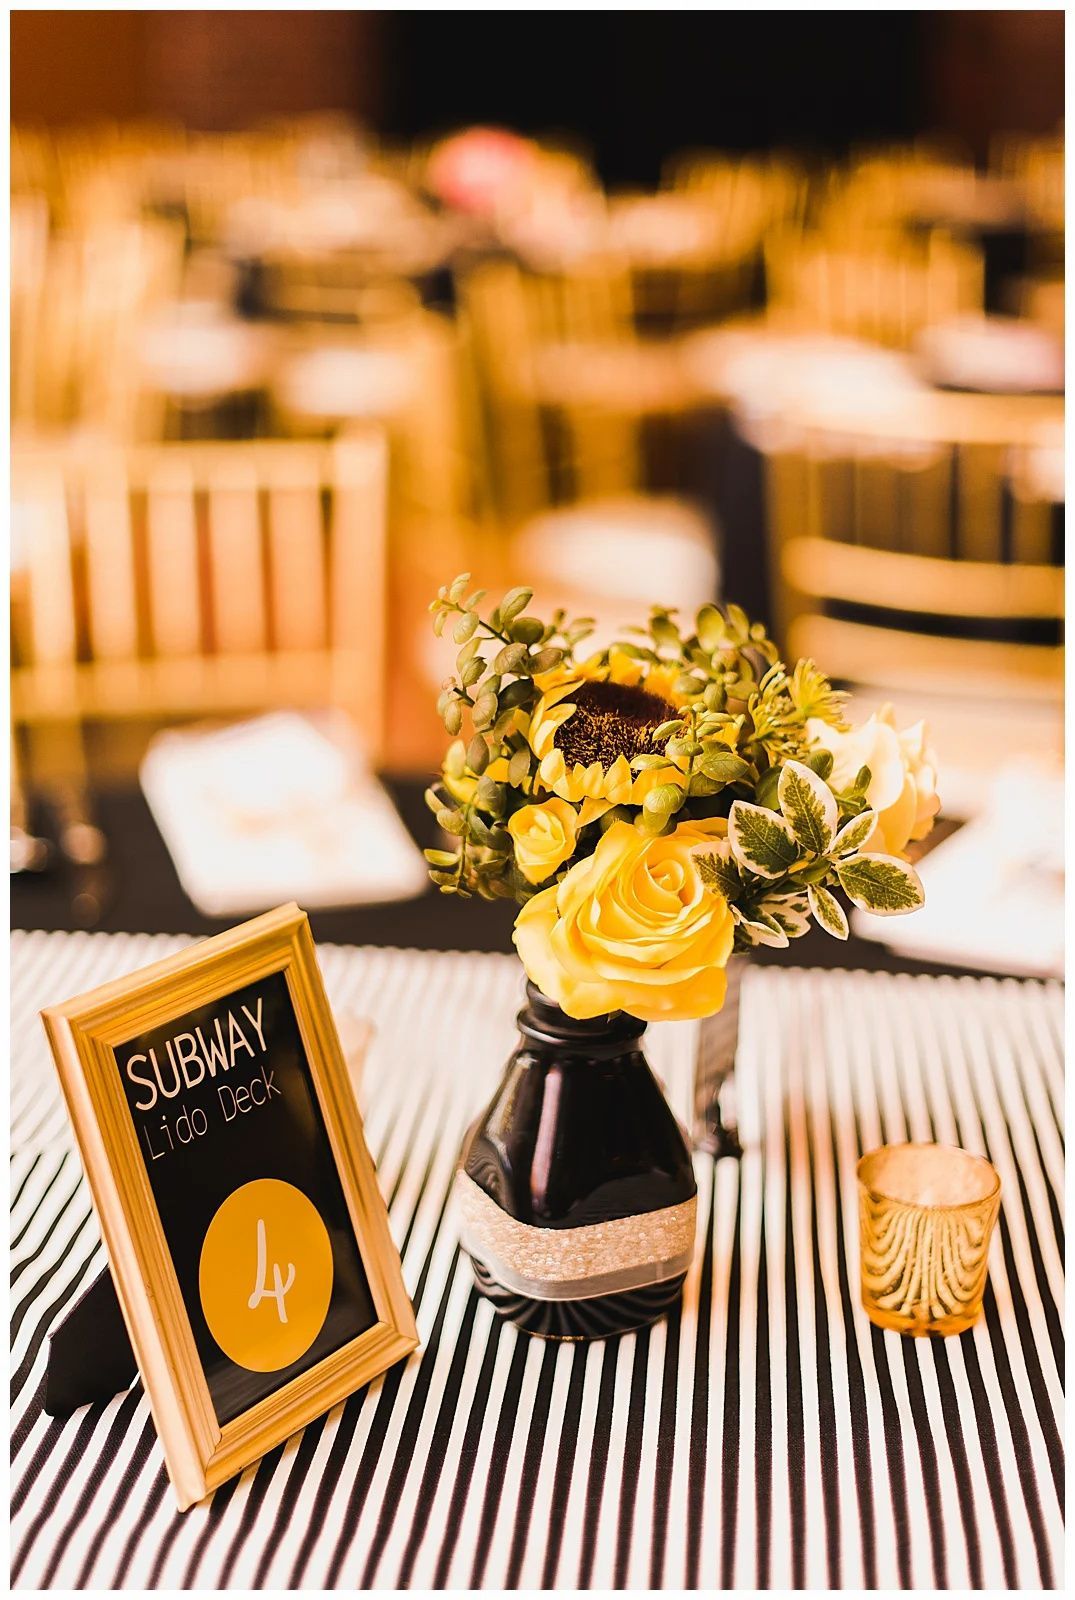 Black and Yellow Kate Spade-Inspired Wedding Centerpiece